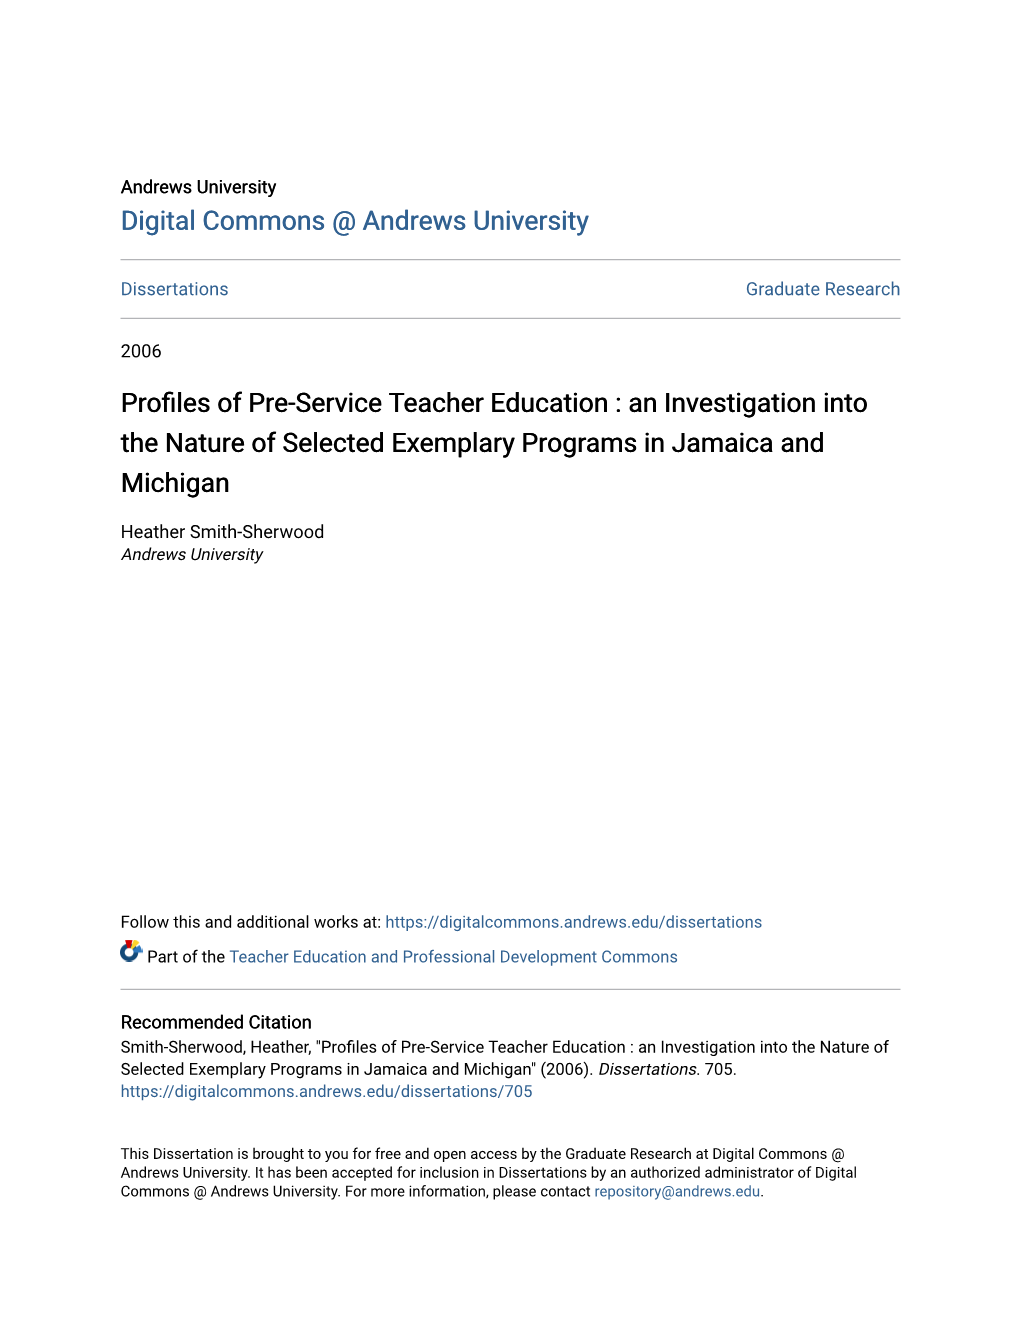 Profiles of Pre-Service Teacher Education : an Investigation Into the Nature of Selected Exemplary Programs in Jamaica and Michigan